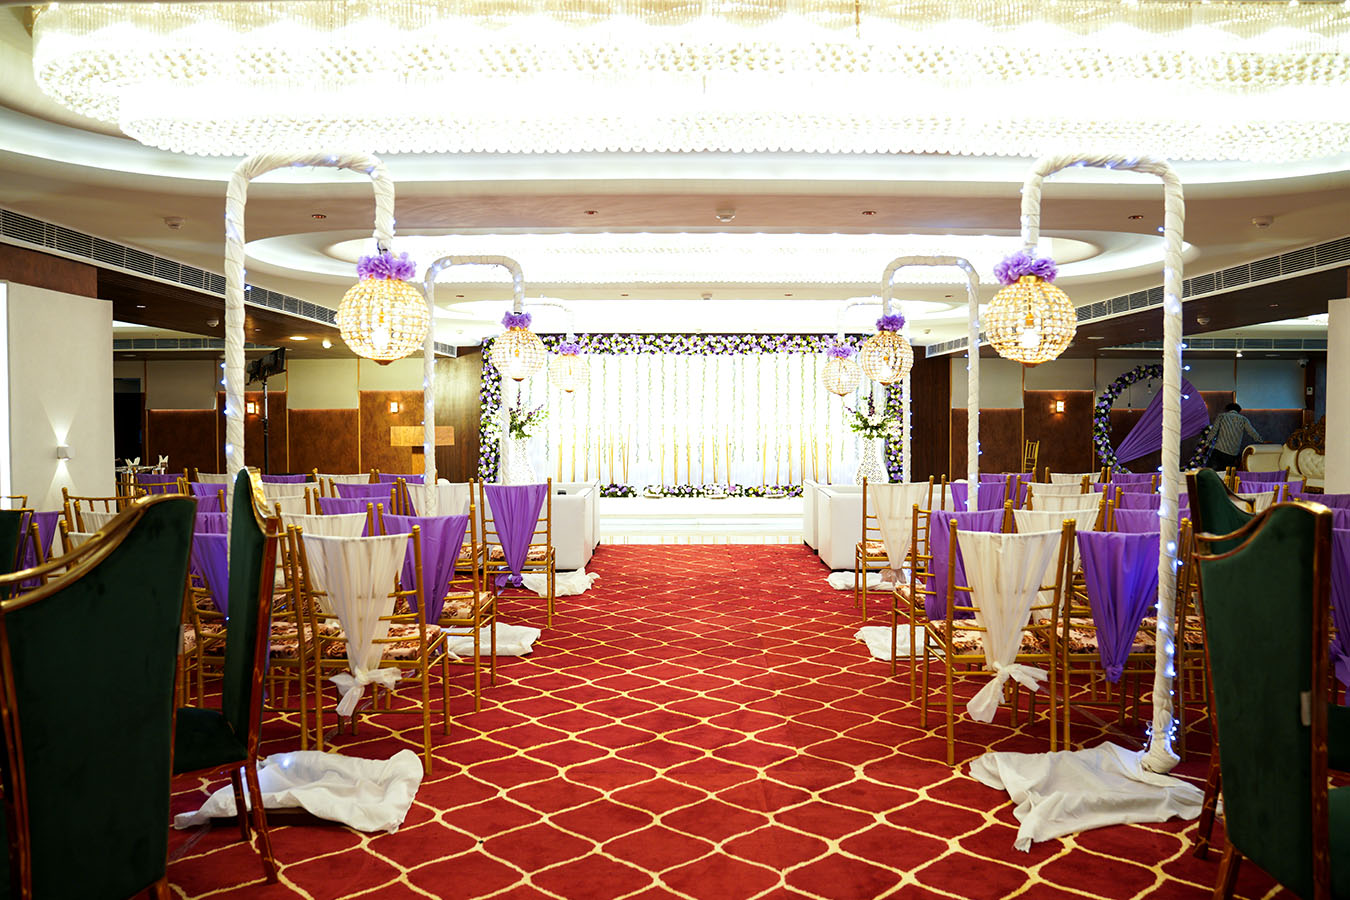 Banquet Halls are designed to accommodate events of all sizes